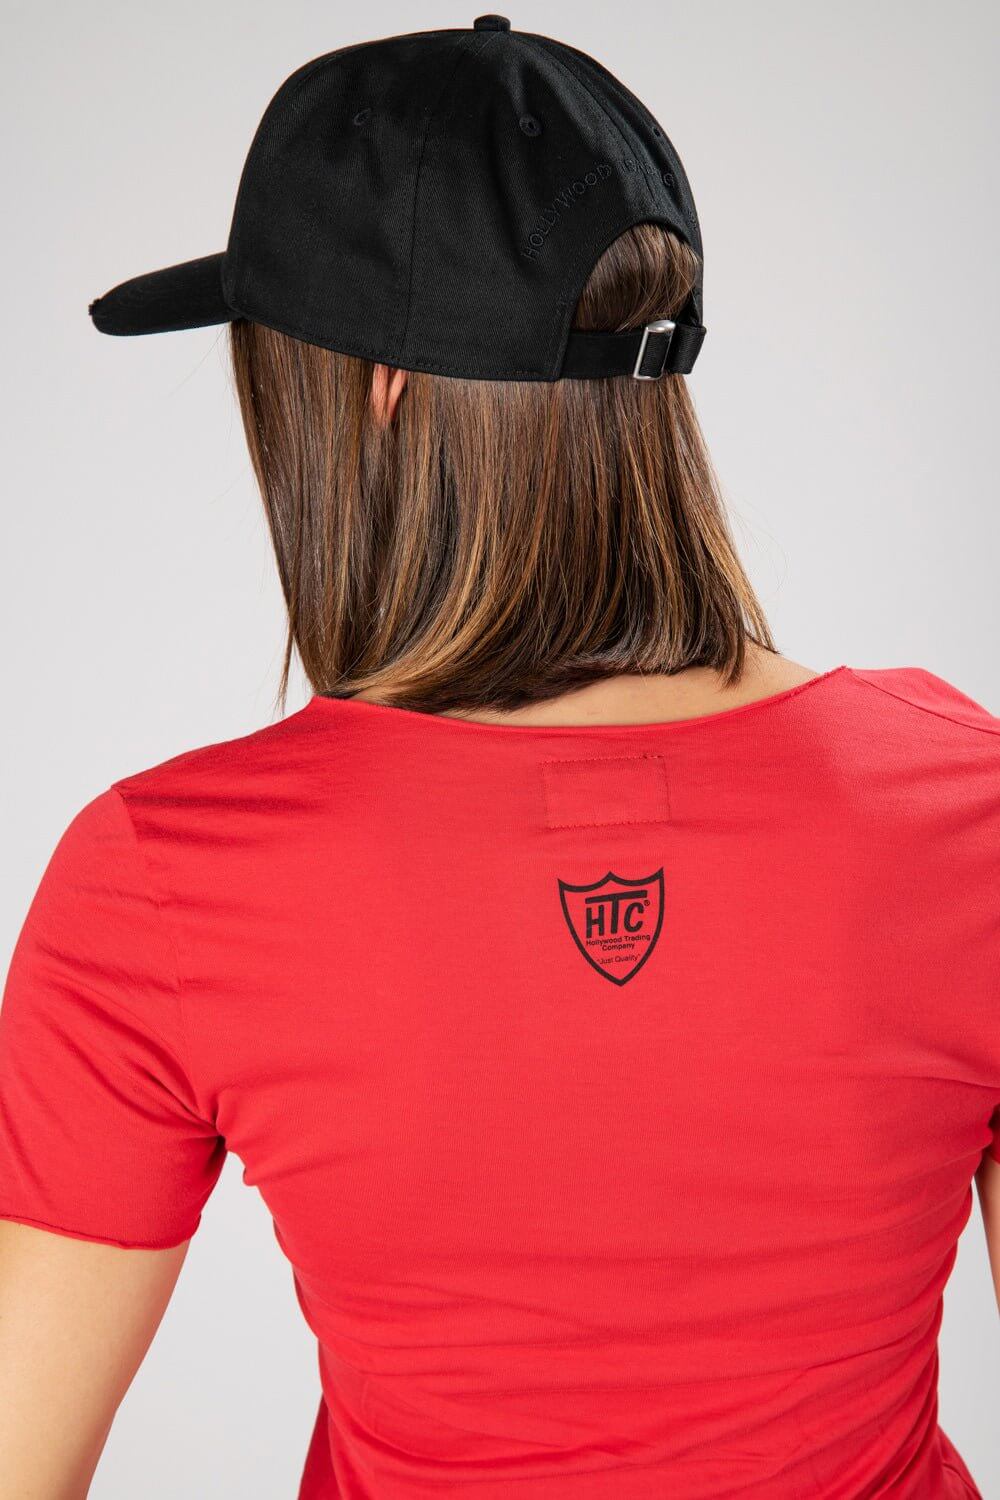 HTC LOGO WOMAN T-SHIRT Slim fit woman t-shirt with printed logo on the front. 100% cotton HTC LOS ANGELES